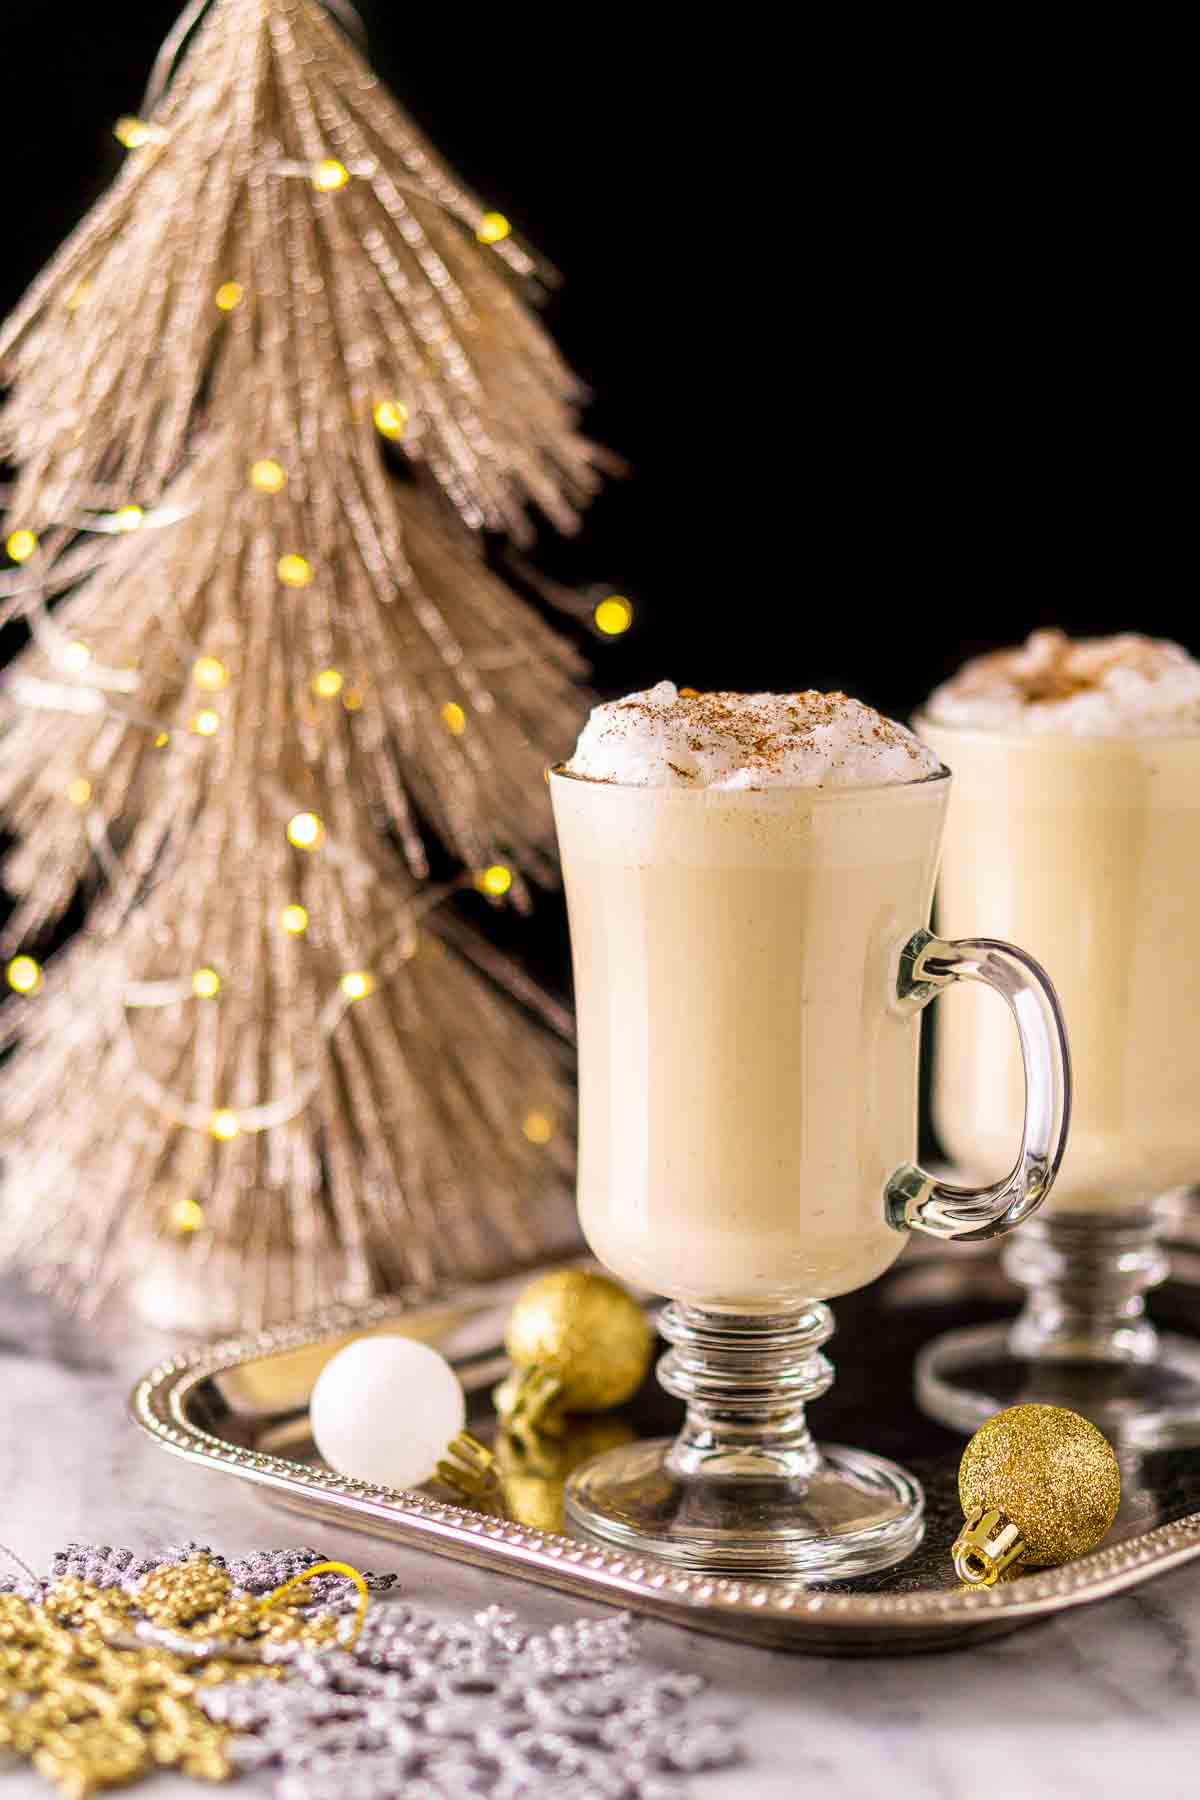 A straight-on view of the Baileys eggnog with gold and silver ornaments around it and a glittery Christmas tree with lights in the background.